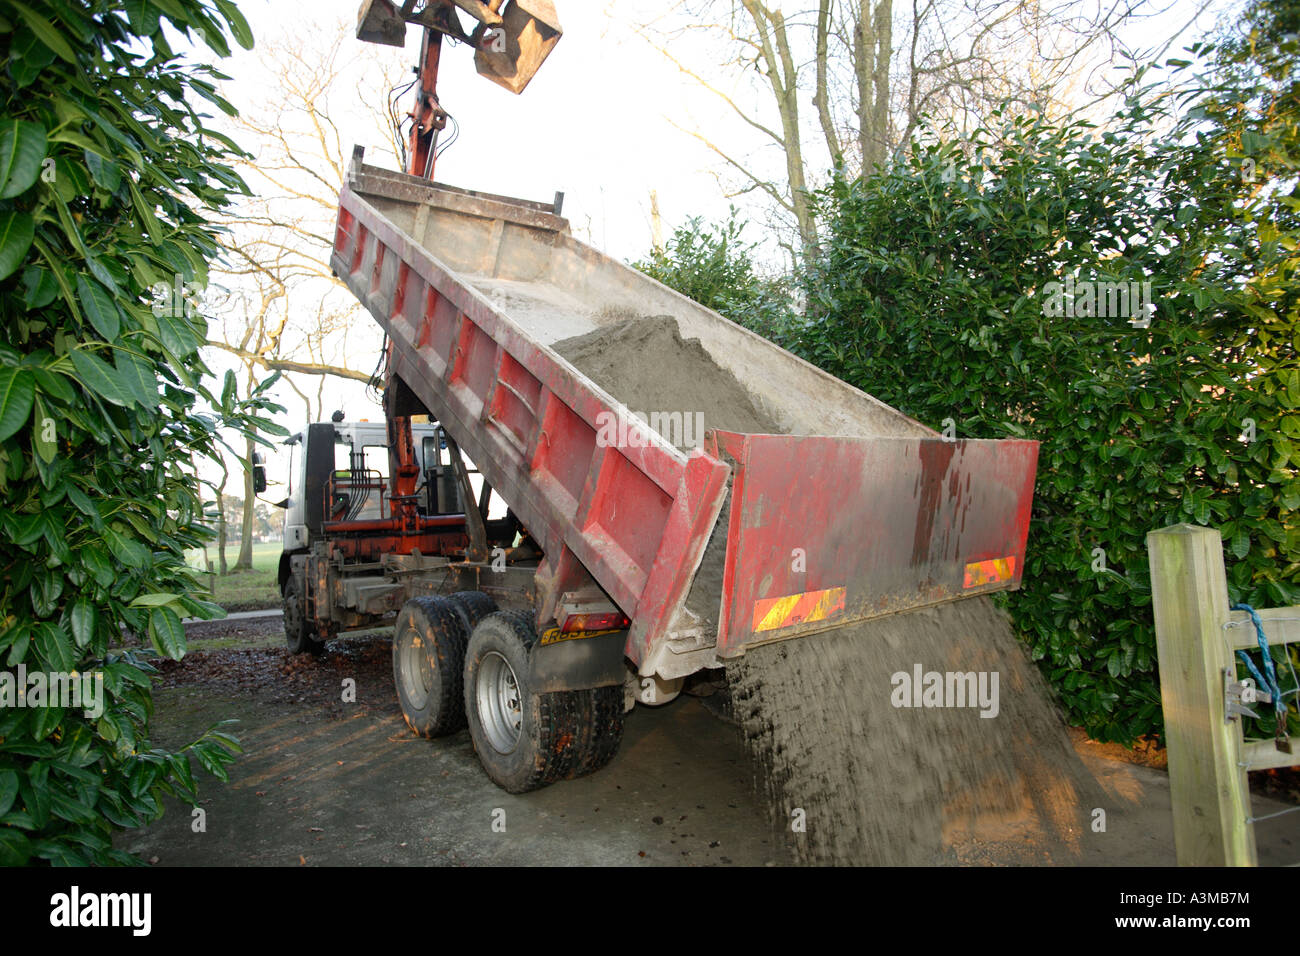 Dumper truck emptying load of sand and cement Stock Photo